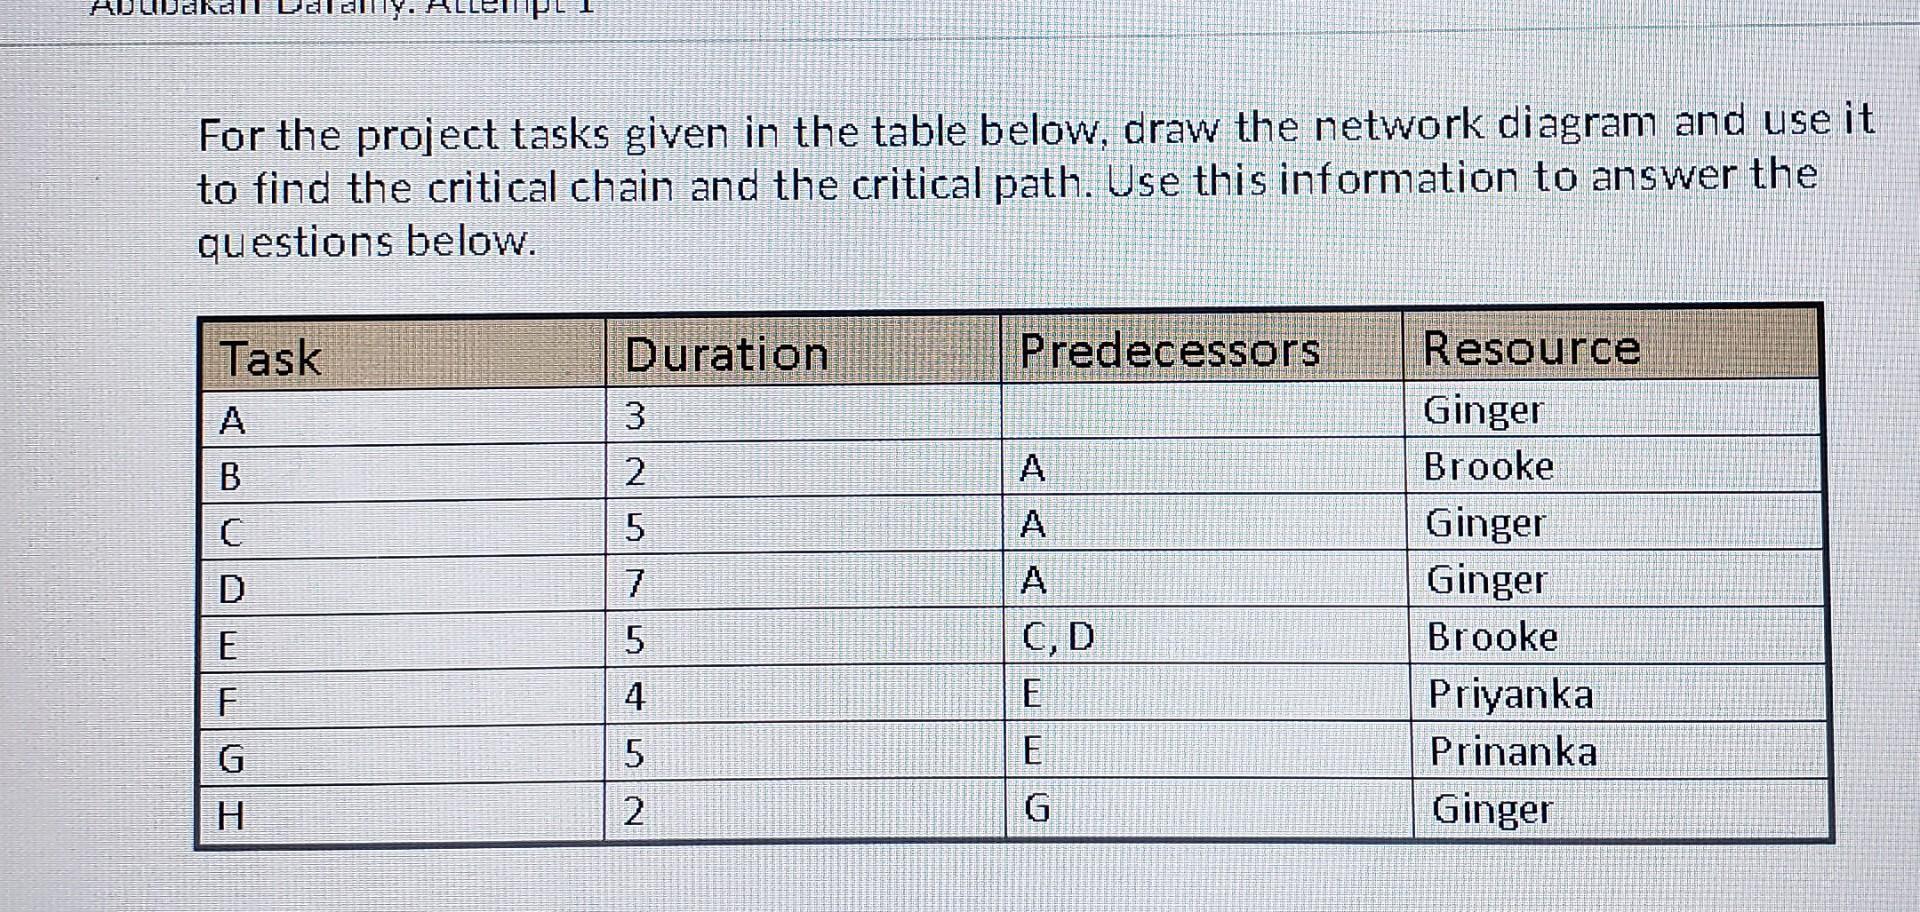 For the project tasks given in the table below, draw the network diagram and use it to find the critical chain and the critic